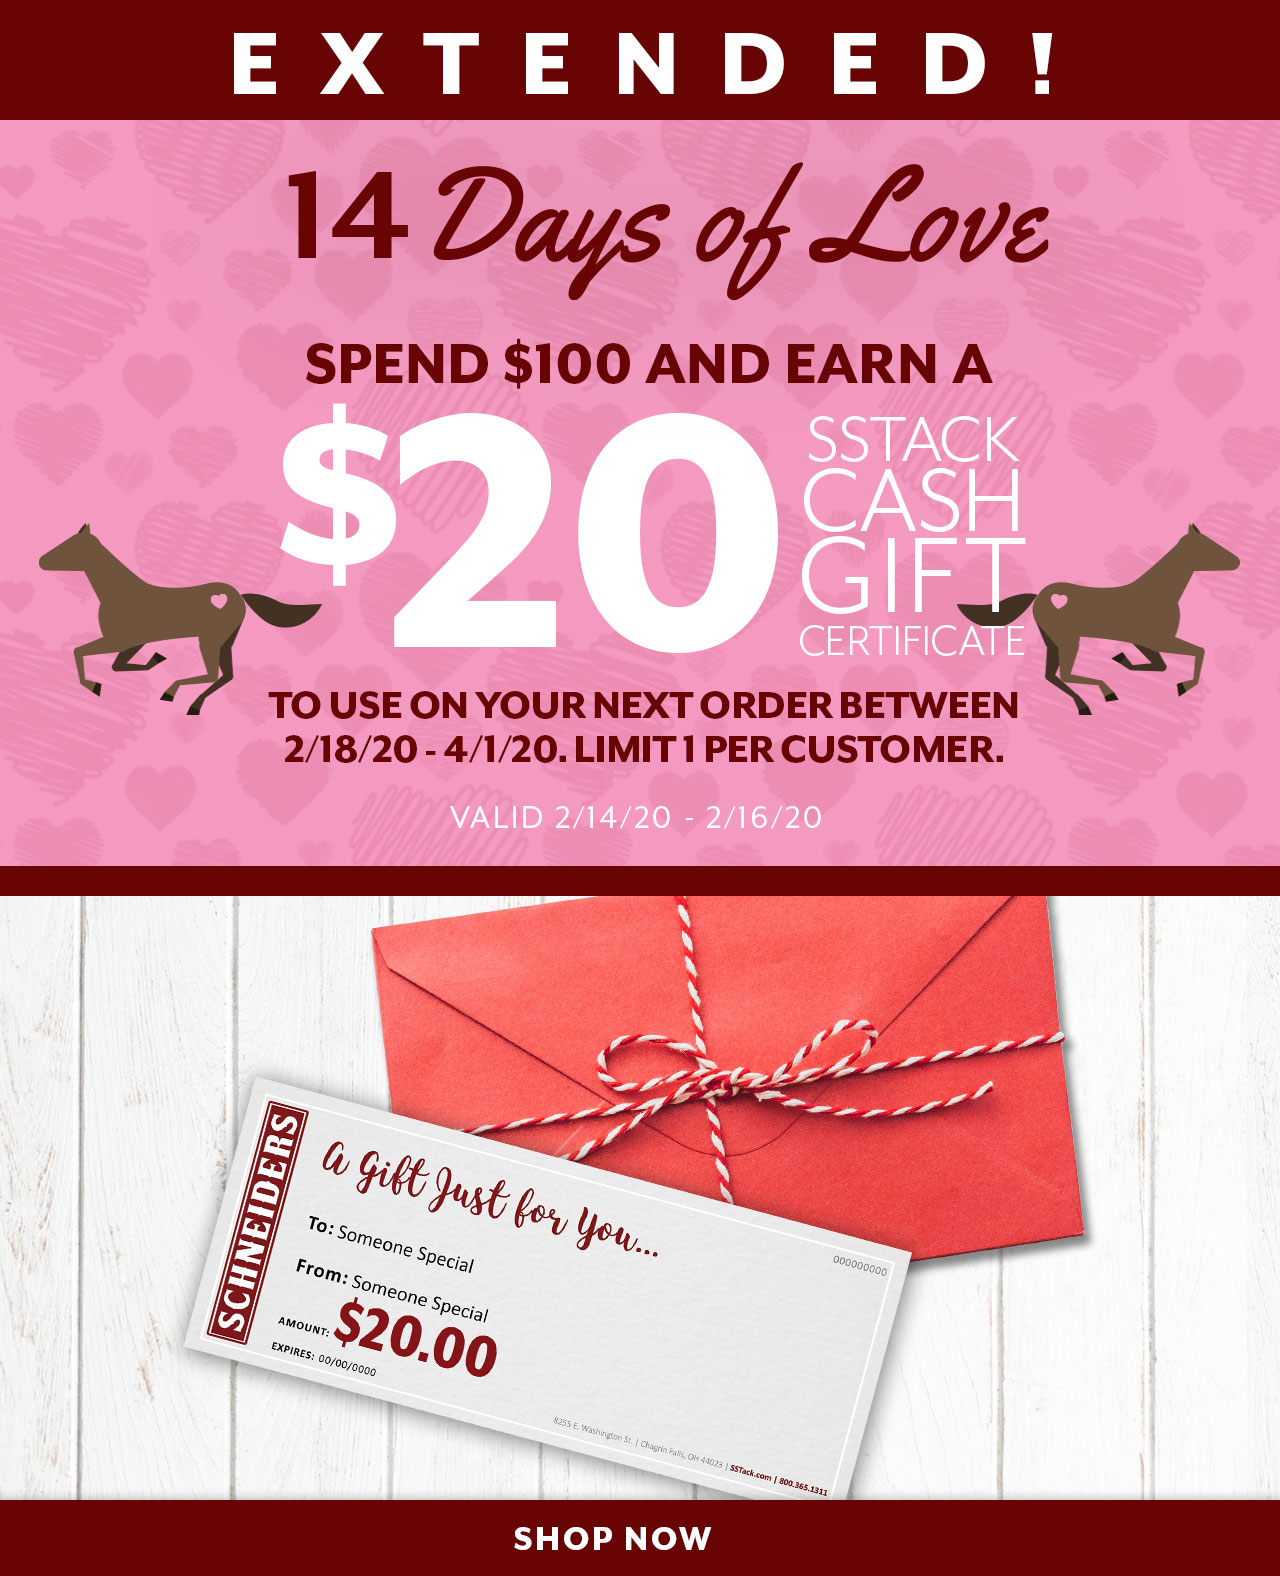 Extended through the weekend: Earn a $20 SSTACK Cash gift certificate when you spend $100+. Valid 2/14/20 - 2/16/20, limit 1 per order.. 